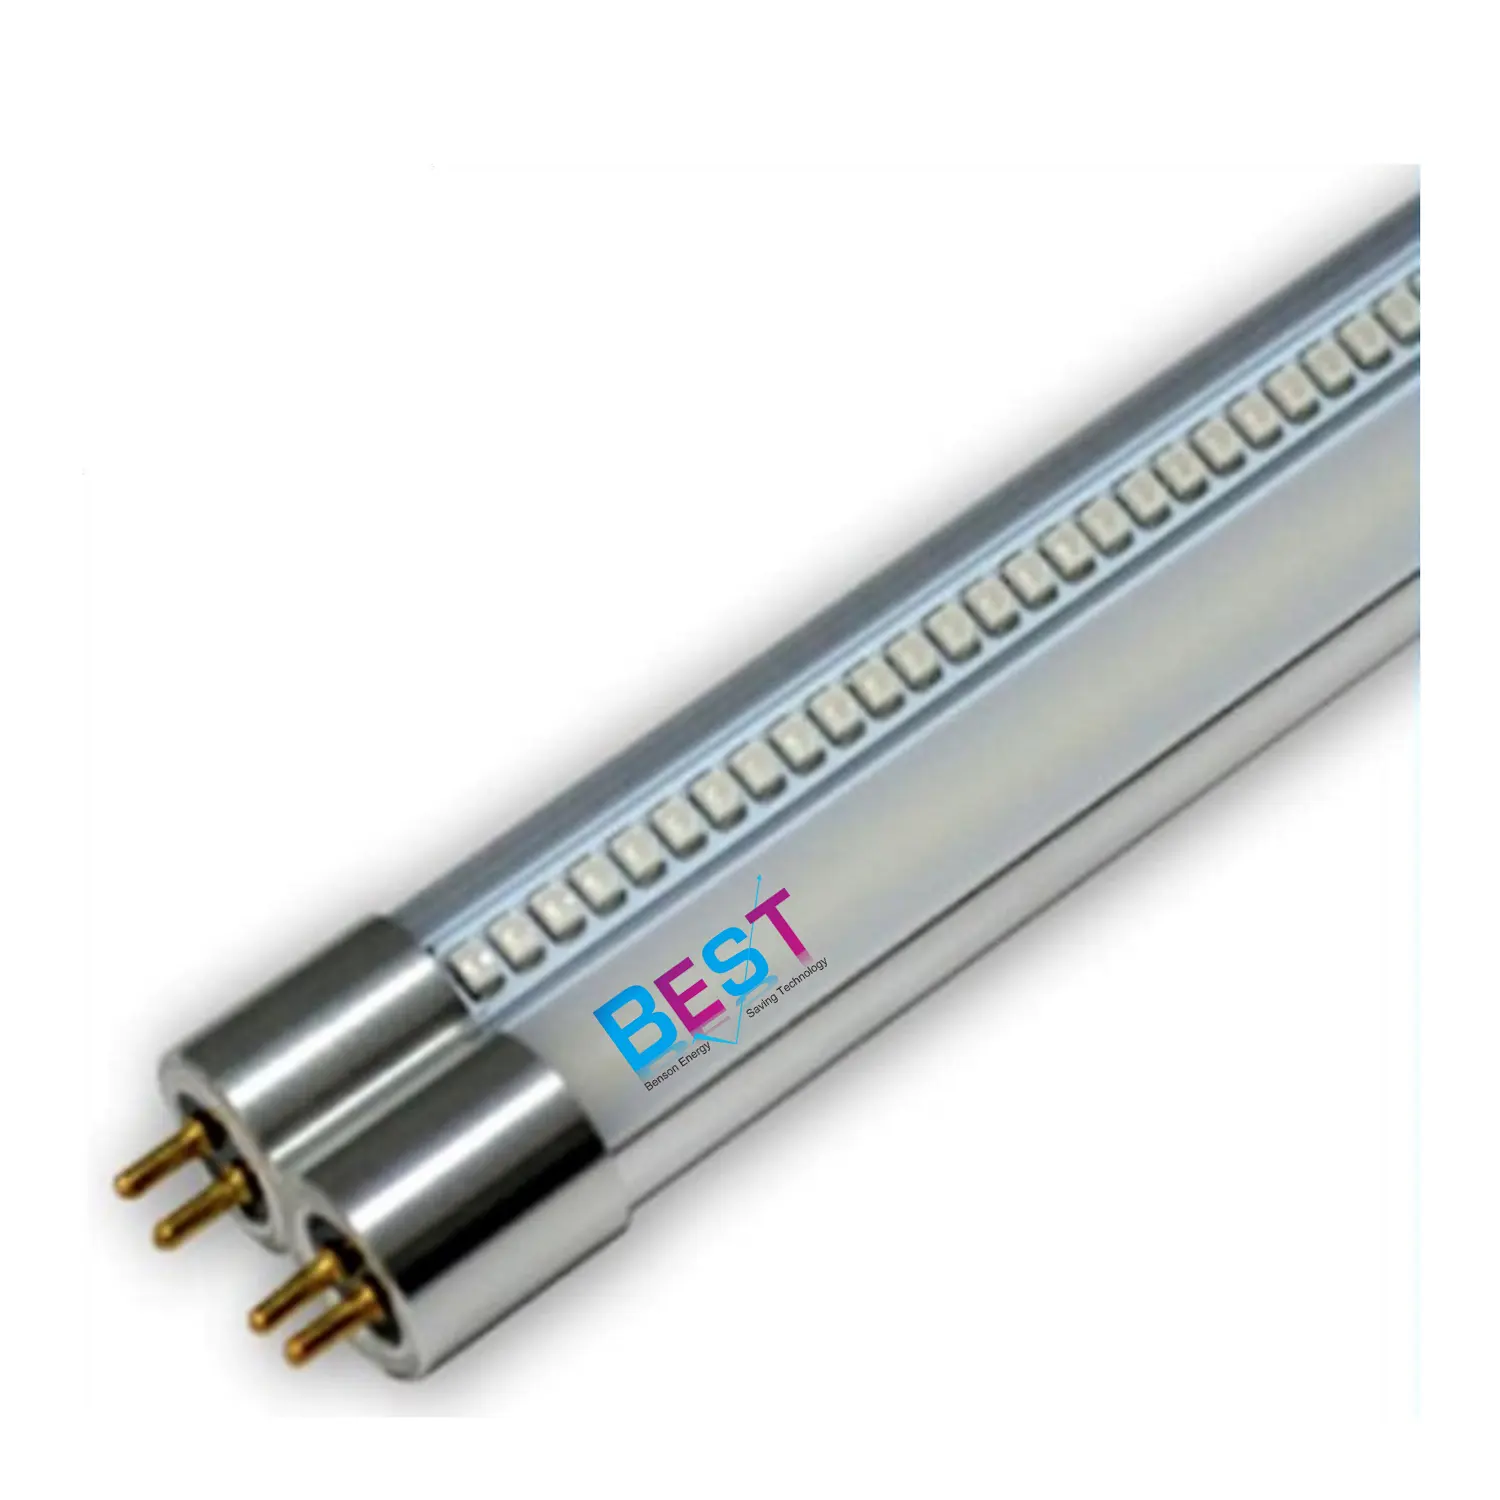 BSET plug and play T5 LED retrofit tube; Suitable for Replacing T5 fluorescent Luminaire; short tube with 212mm 288mm 517mm